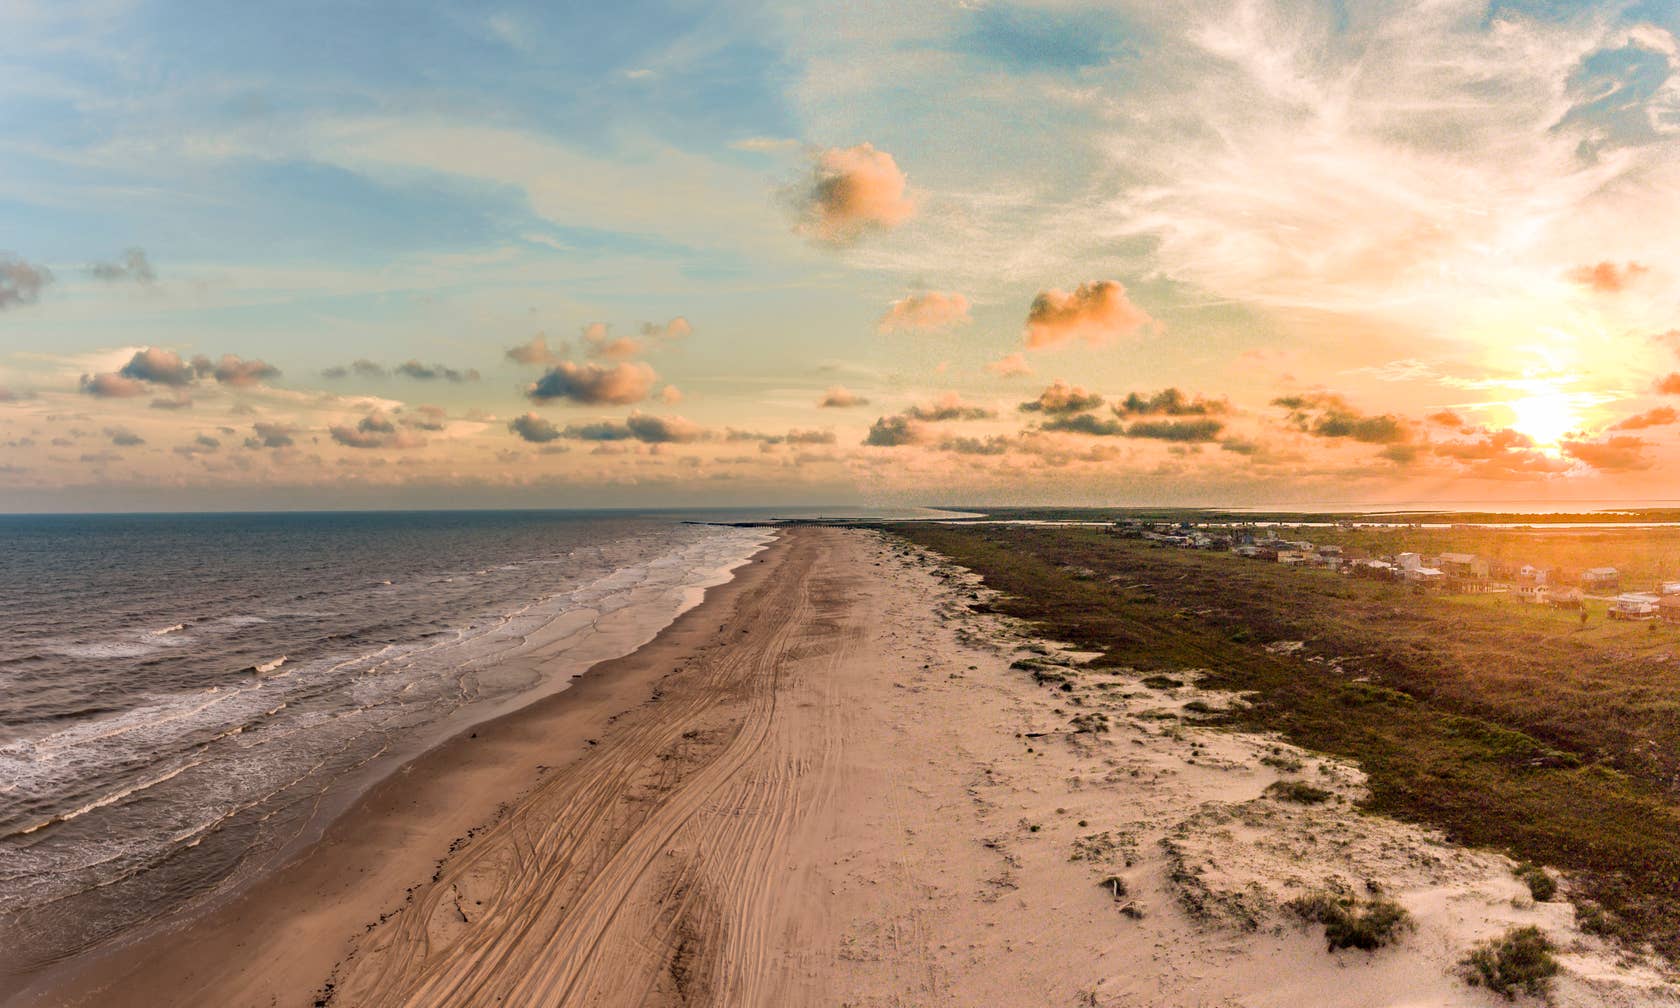 Places to stay in Matagorda